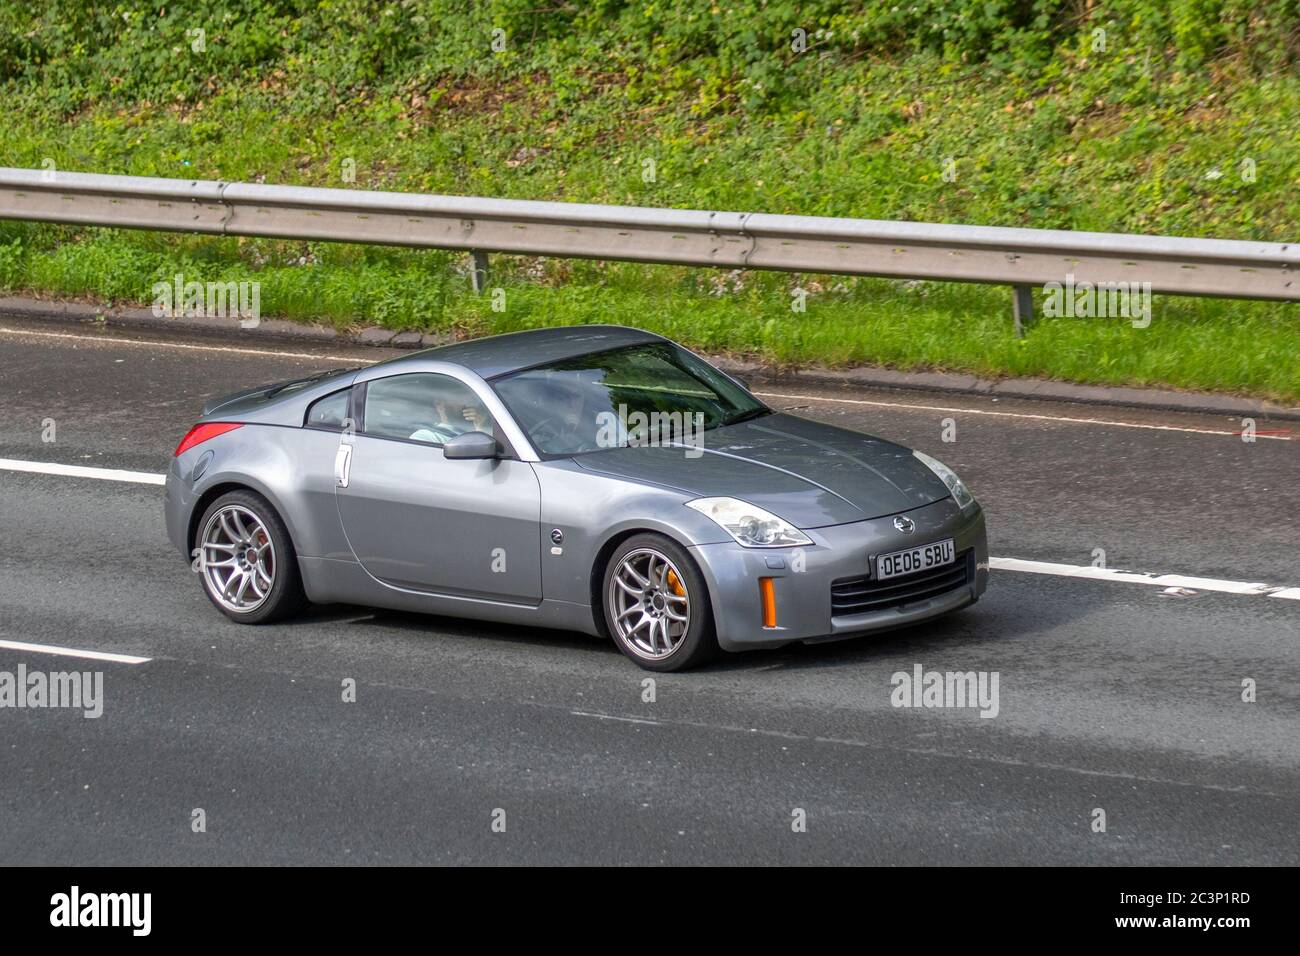 2006 silver Nissan 350 Z; Vehicular traffic moving vehicles, cars driving vehicle on UK roads, motors, motoring on the M6 motorway highway Stock Photo